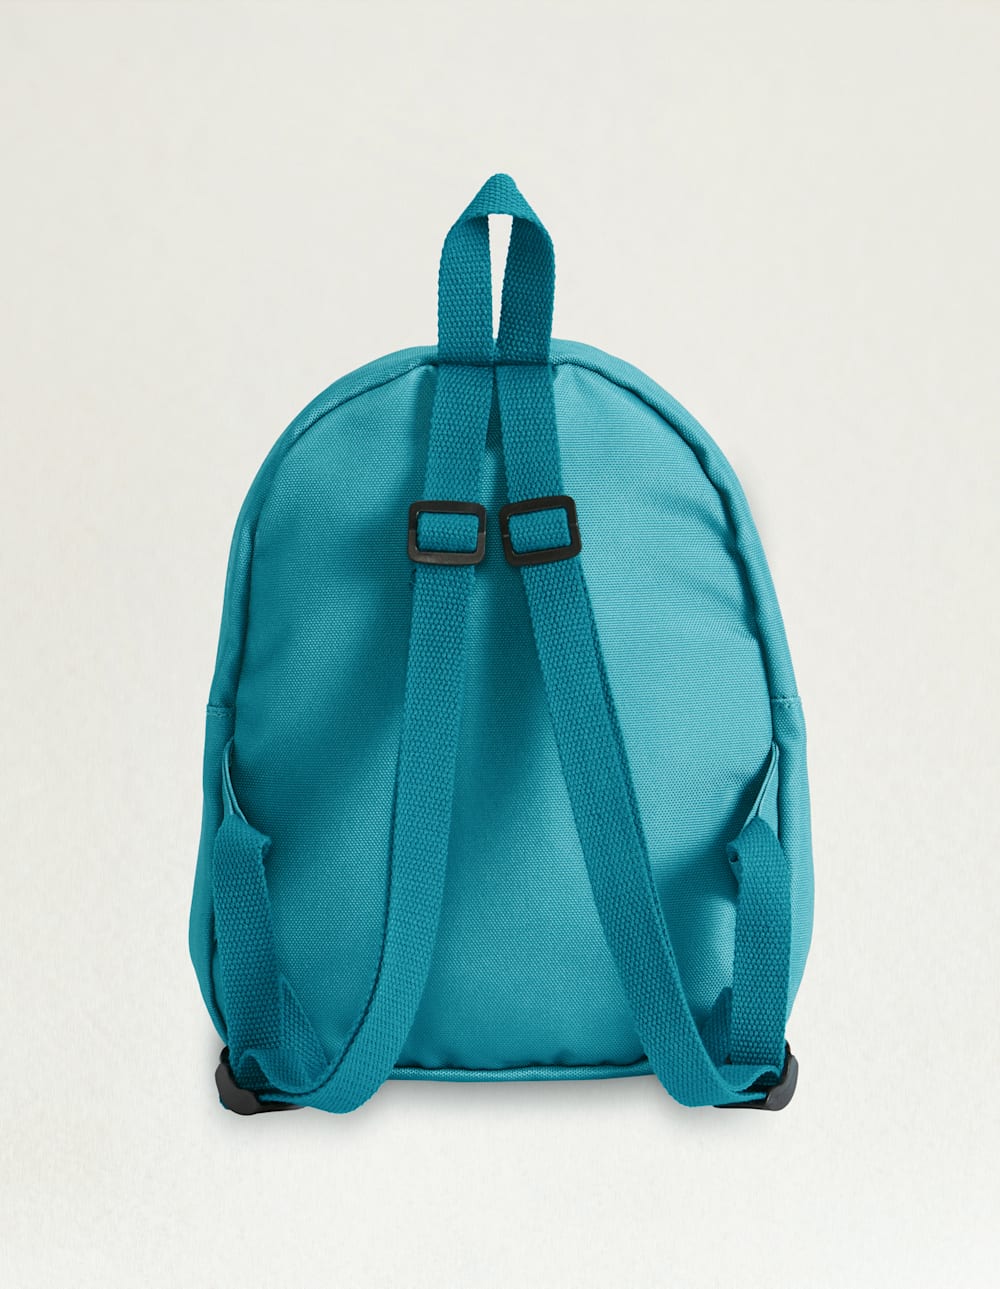 ALTERNATE VIEW OF SUMMERLAND BRIGHT CANOPY CANVAS MINI BACKPACK IN TURQUOISE image number 2